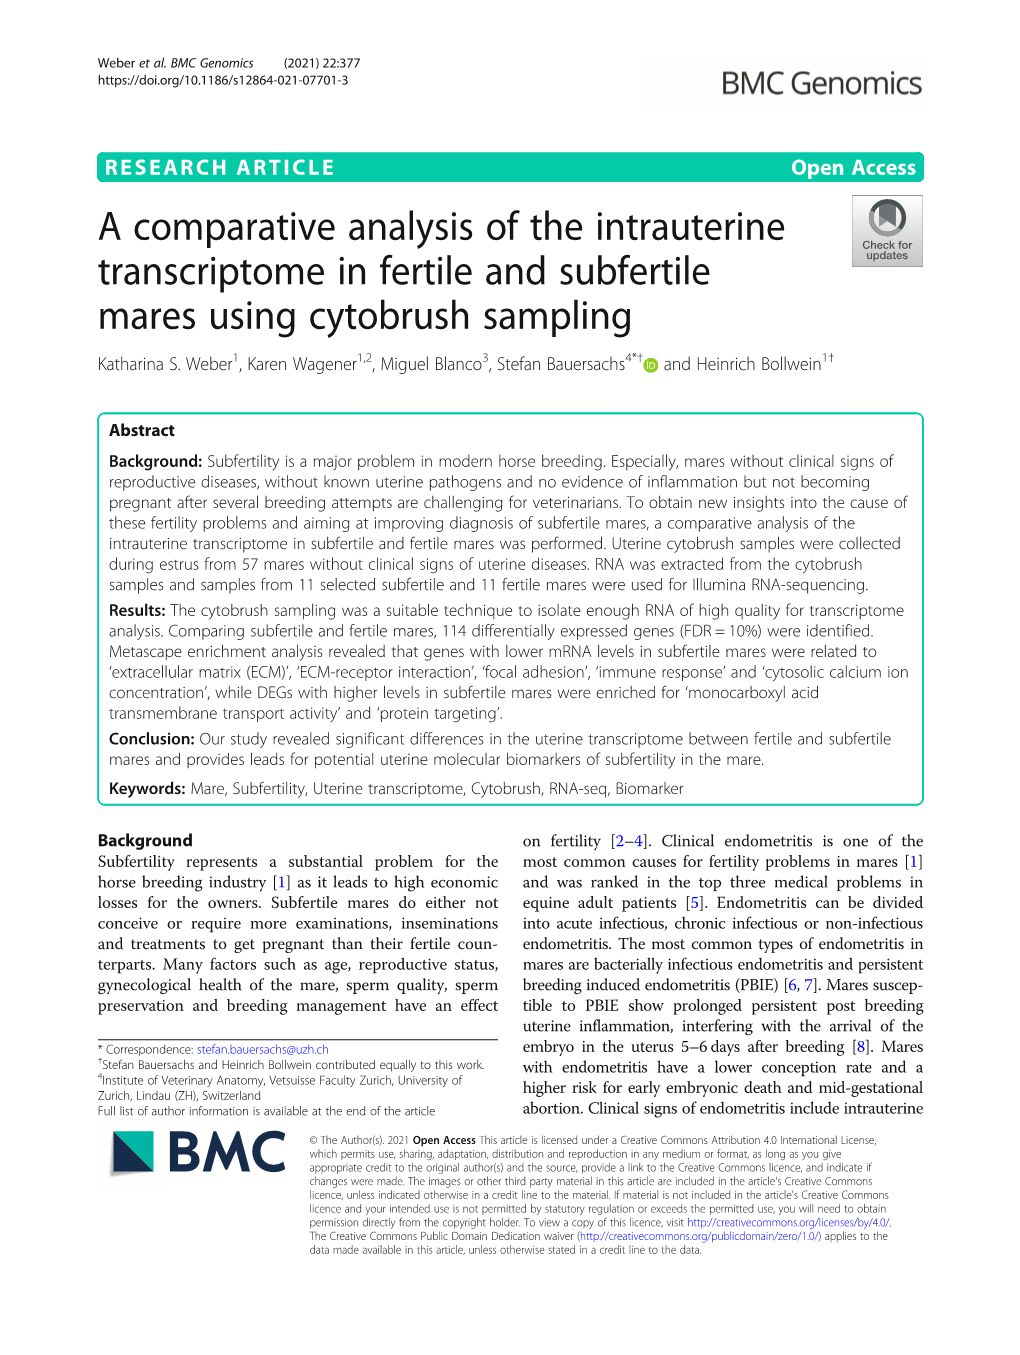 A Comparative Analysis of the Intrauterine Transcriptome in Fertile and Subfertile Mares Using Cytobrush Sampling Katharina S